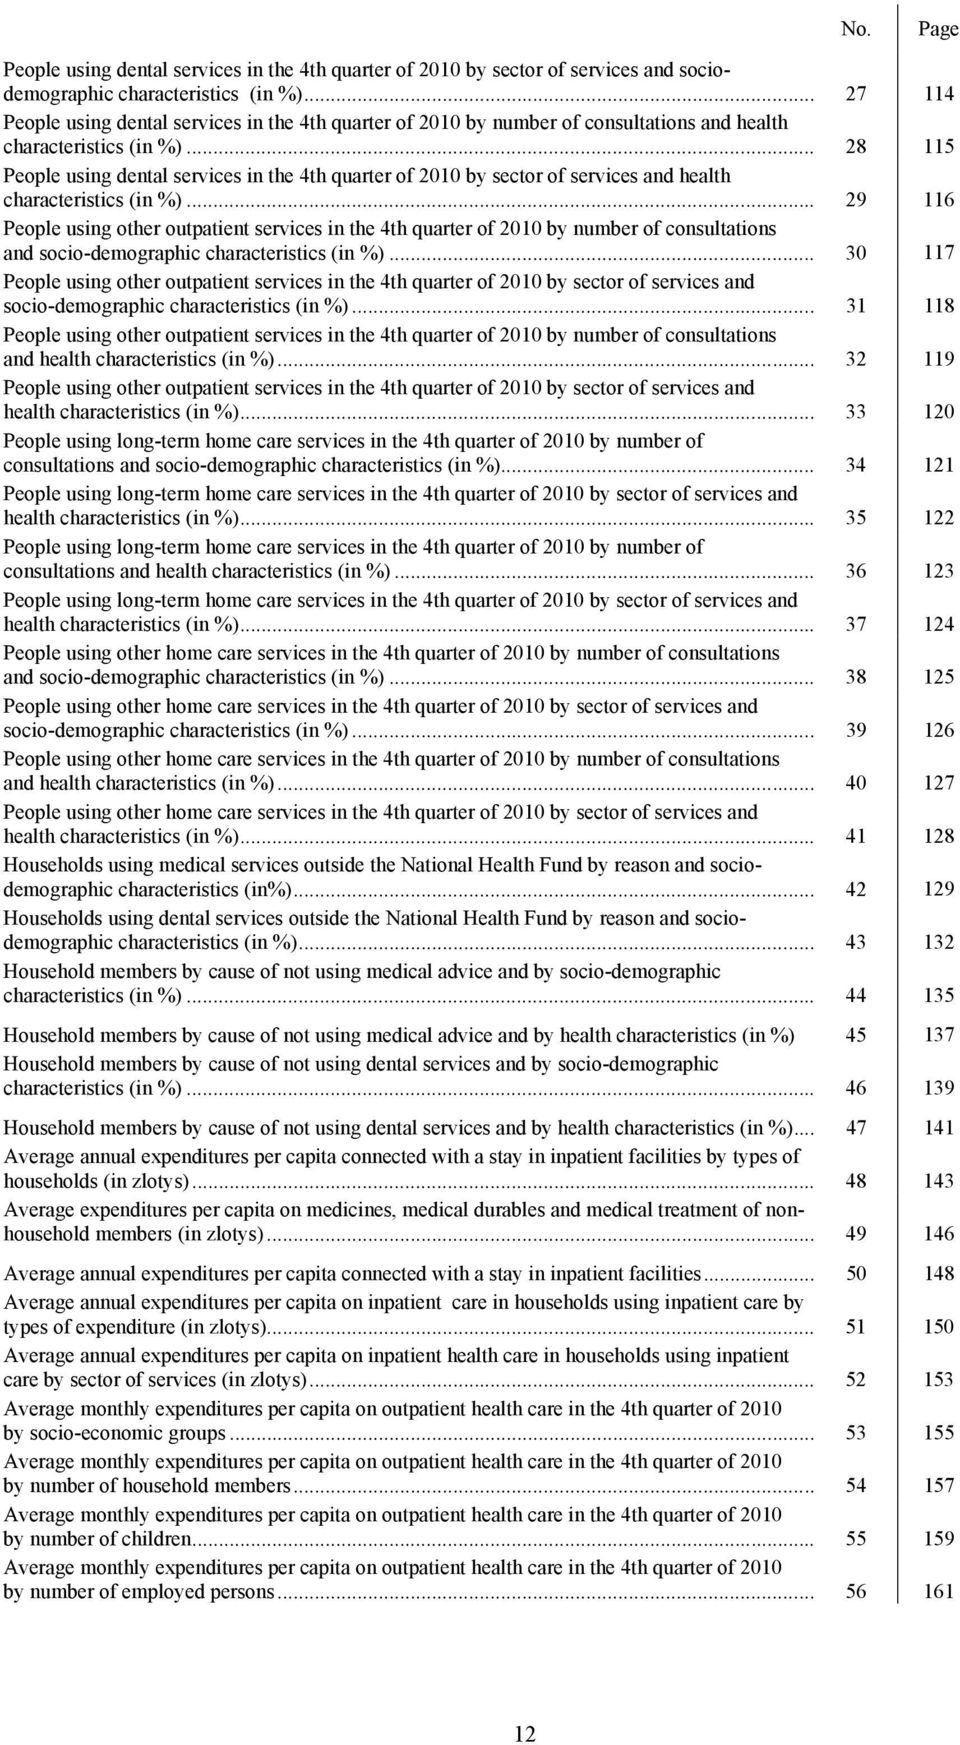 .. 28 115 People using dental services in the 4th quarter of 2010 by sector of services and health characteristics (in %).